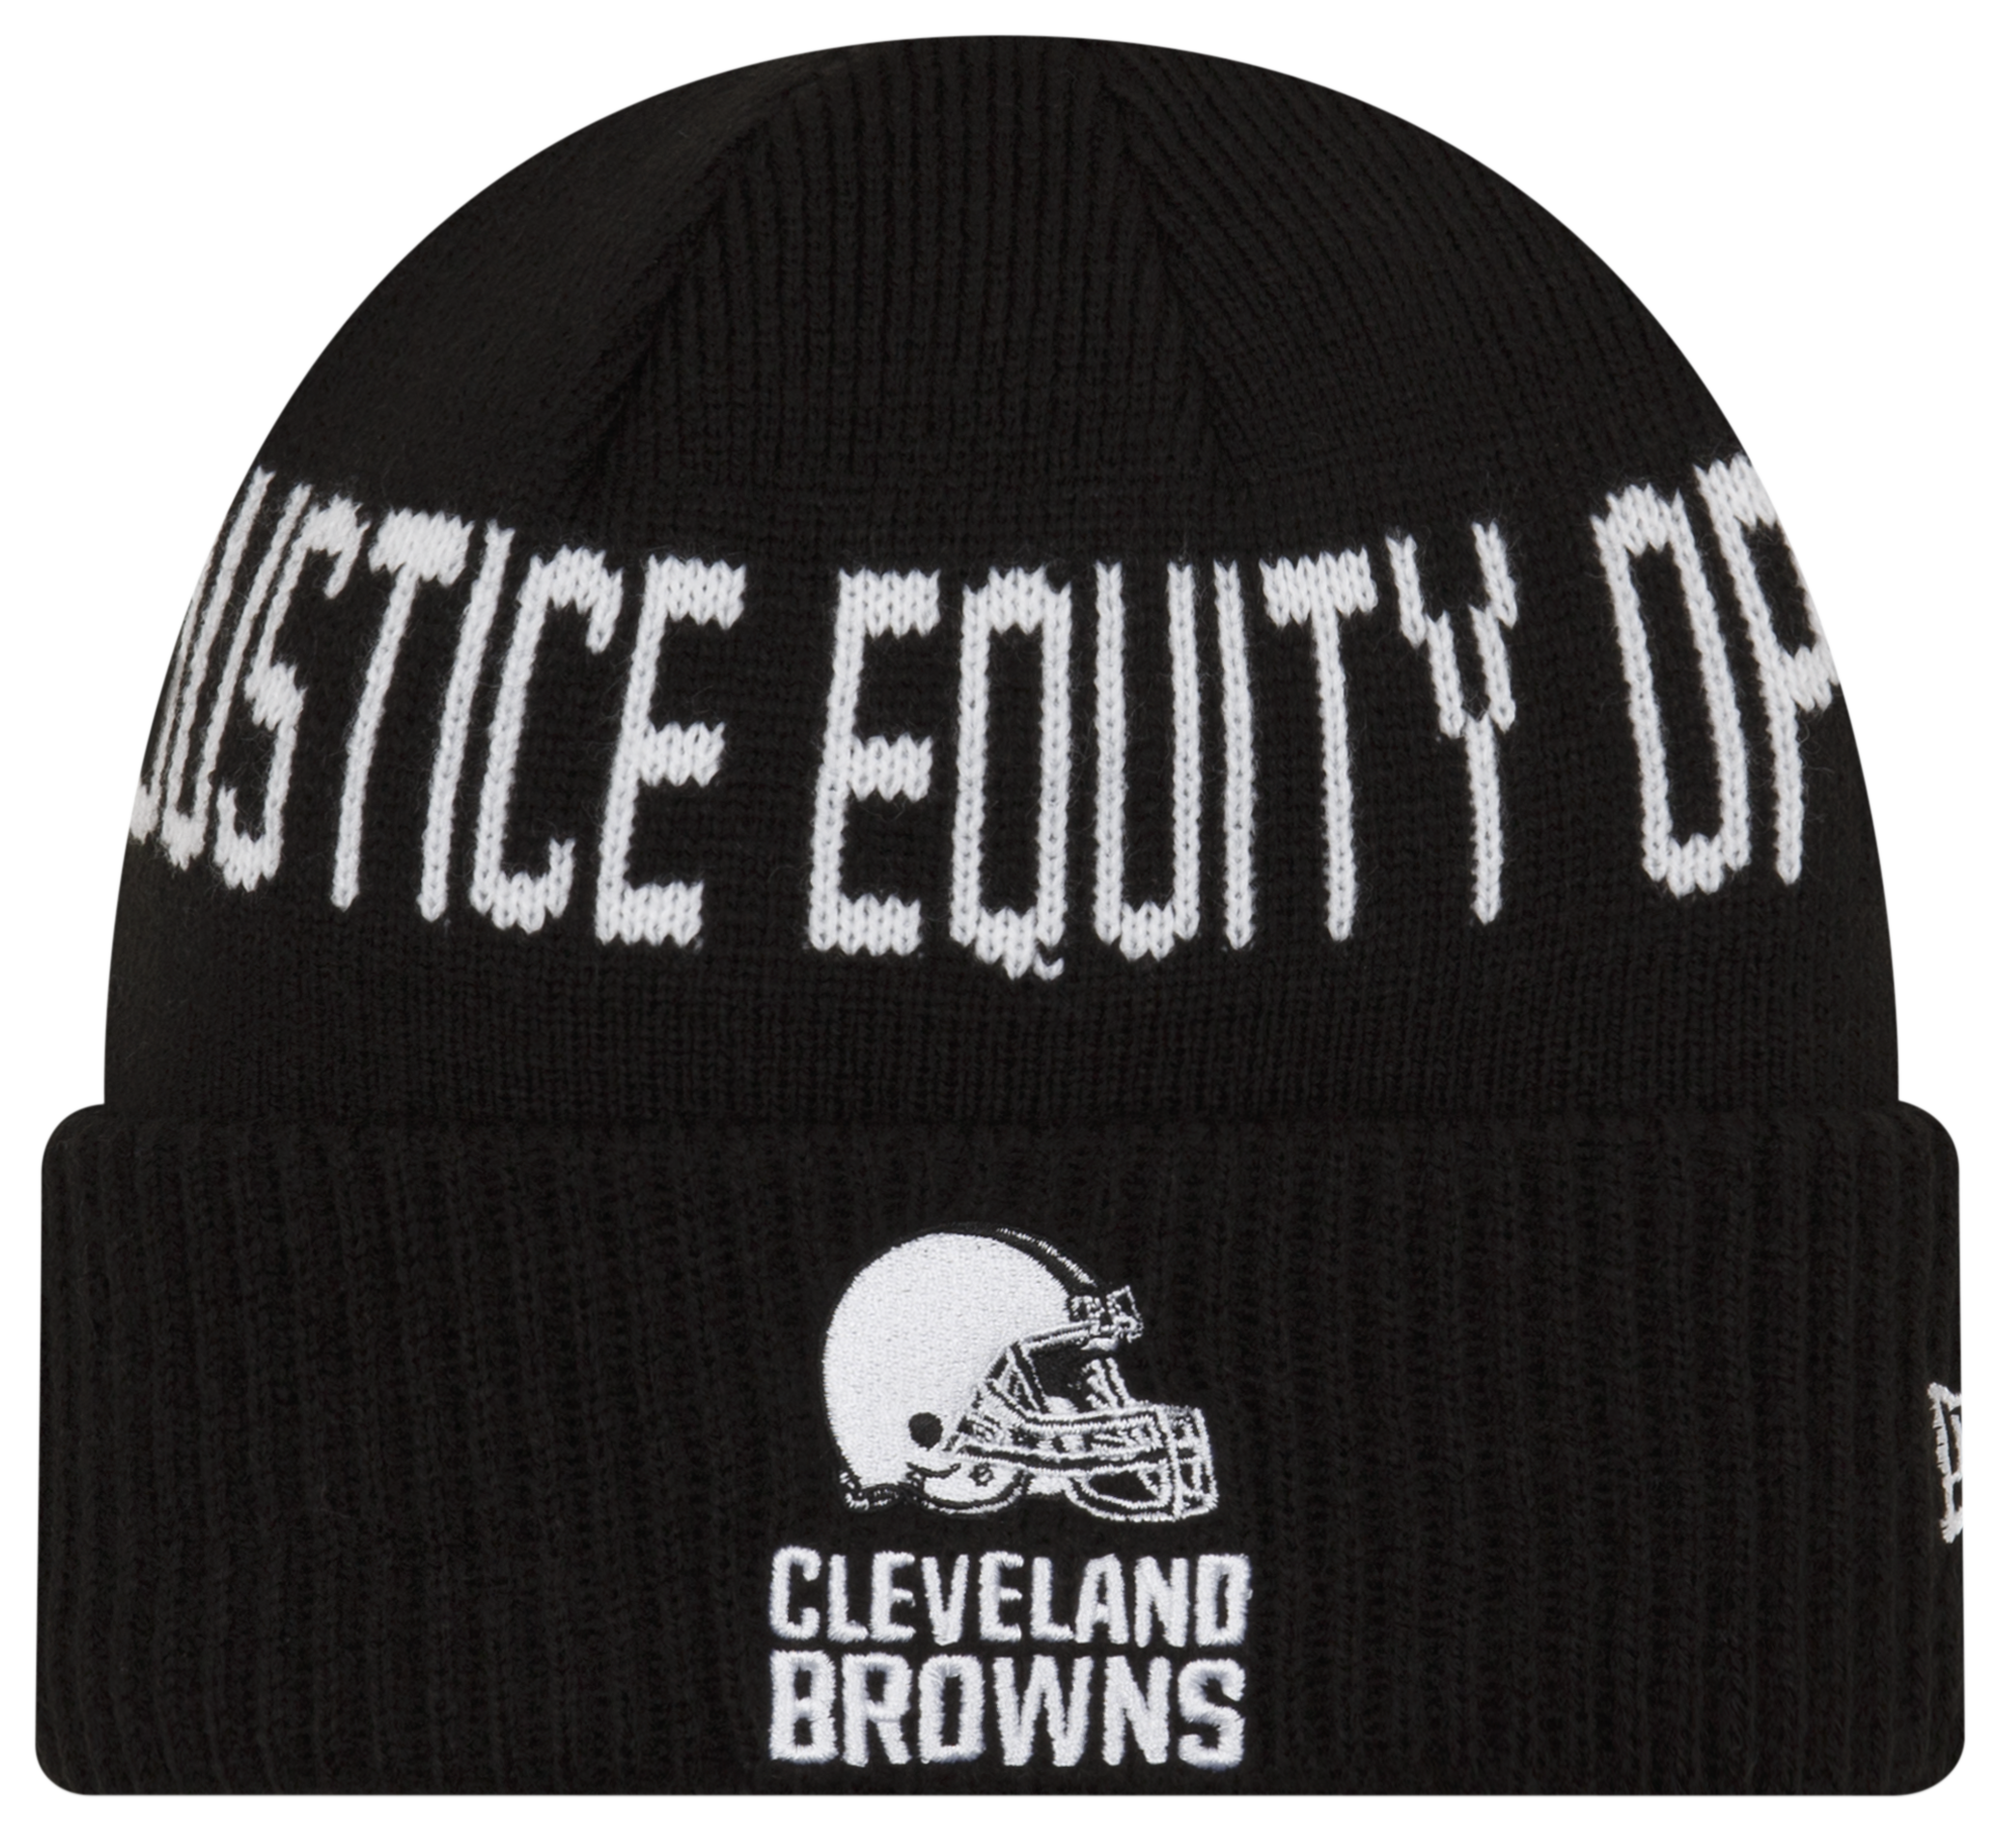 New Era Browns Social Justice Knit Beanie